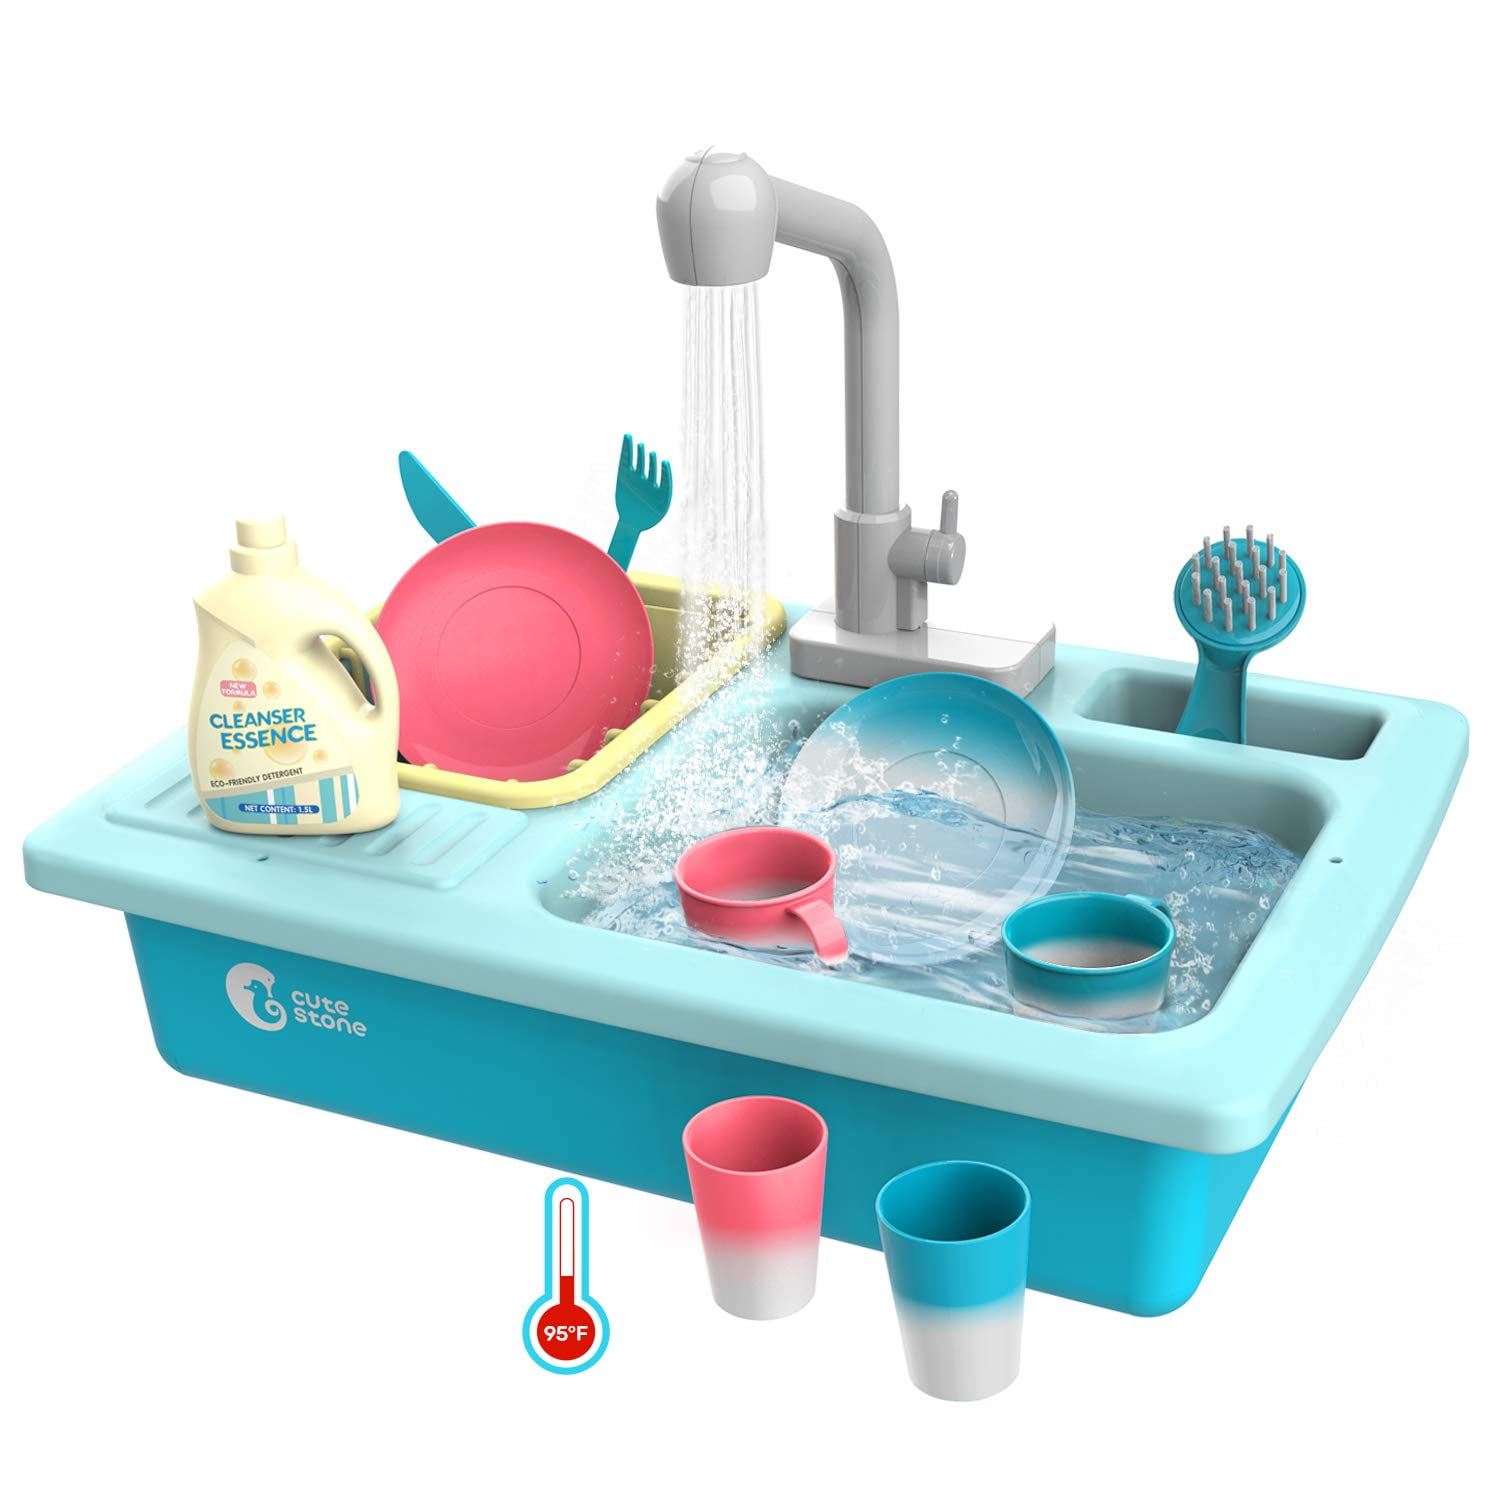 CUTE STONE Microwave Toys Kitchen Play Set, Kids Play Appliances Elect